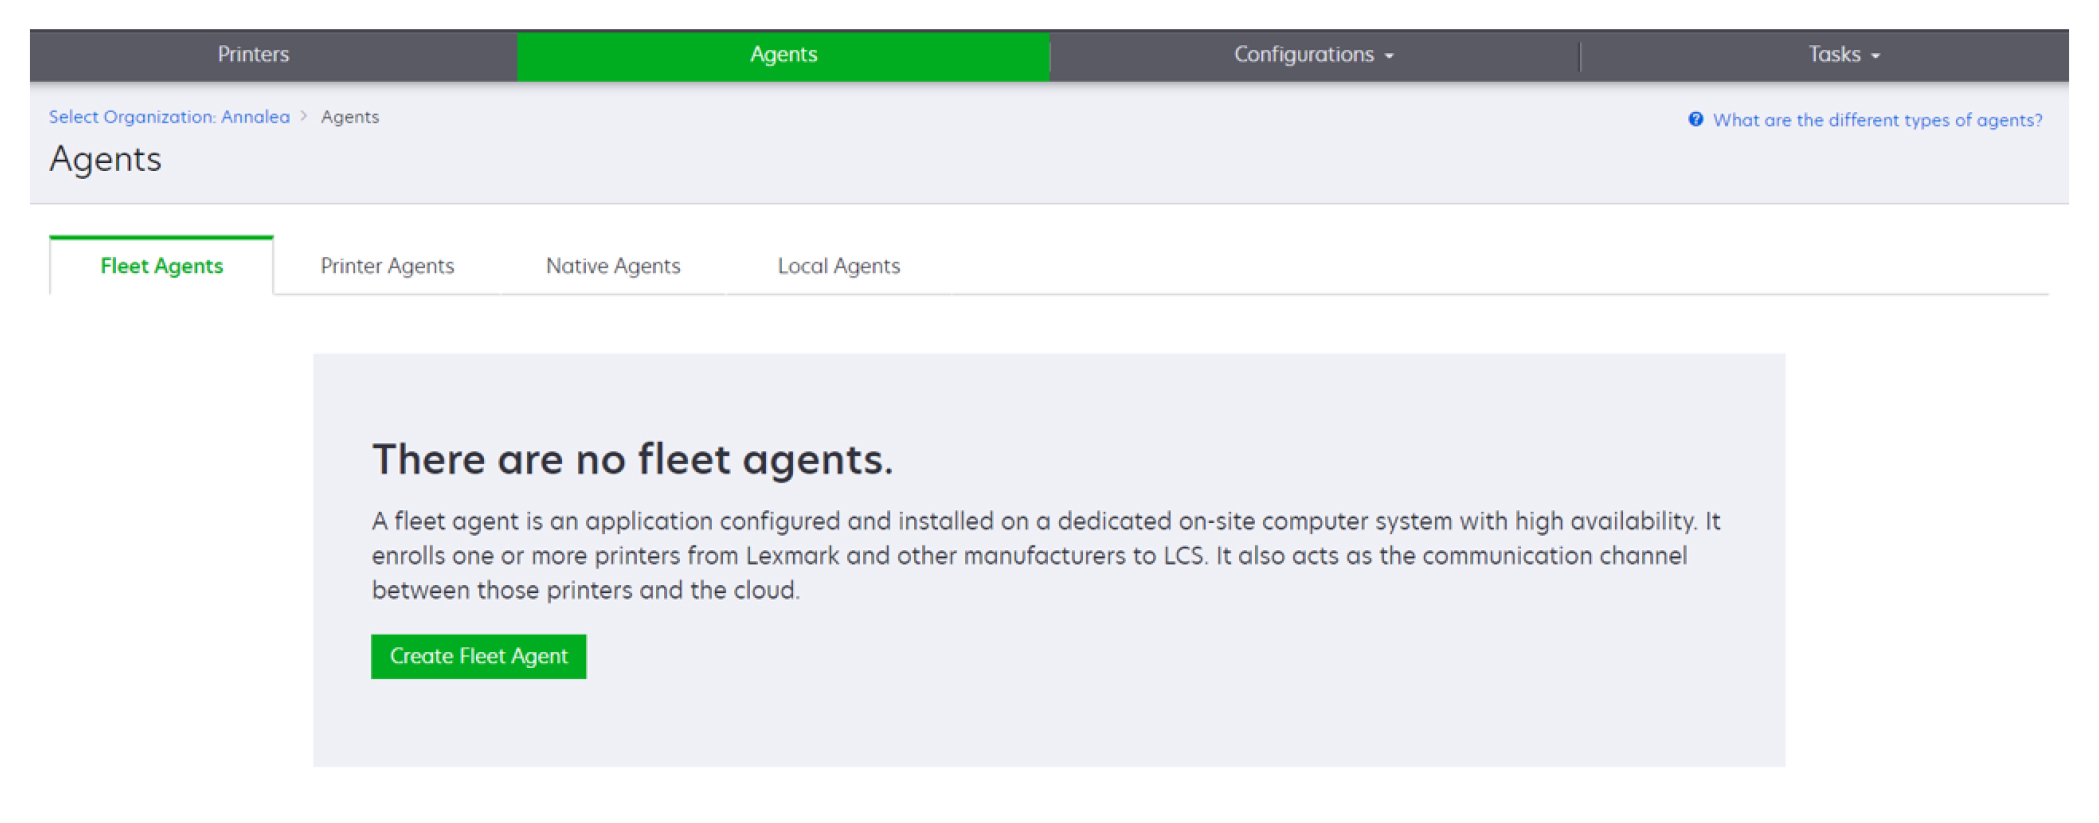 A screenshot showing how to create a fleet agent using the Agents tab of the Fleet Management web portal